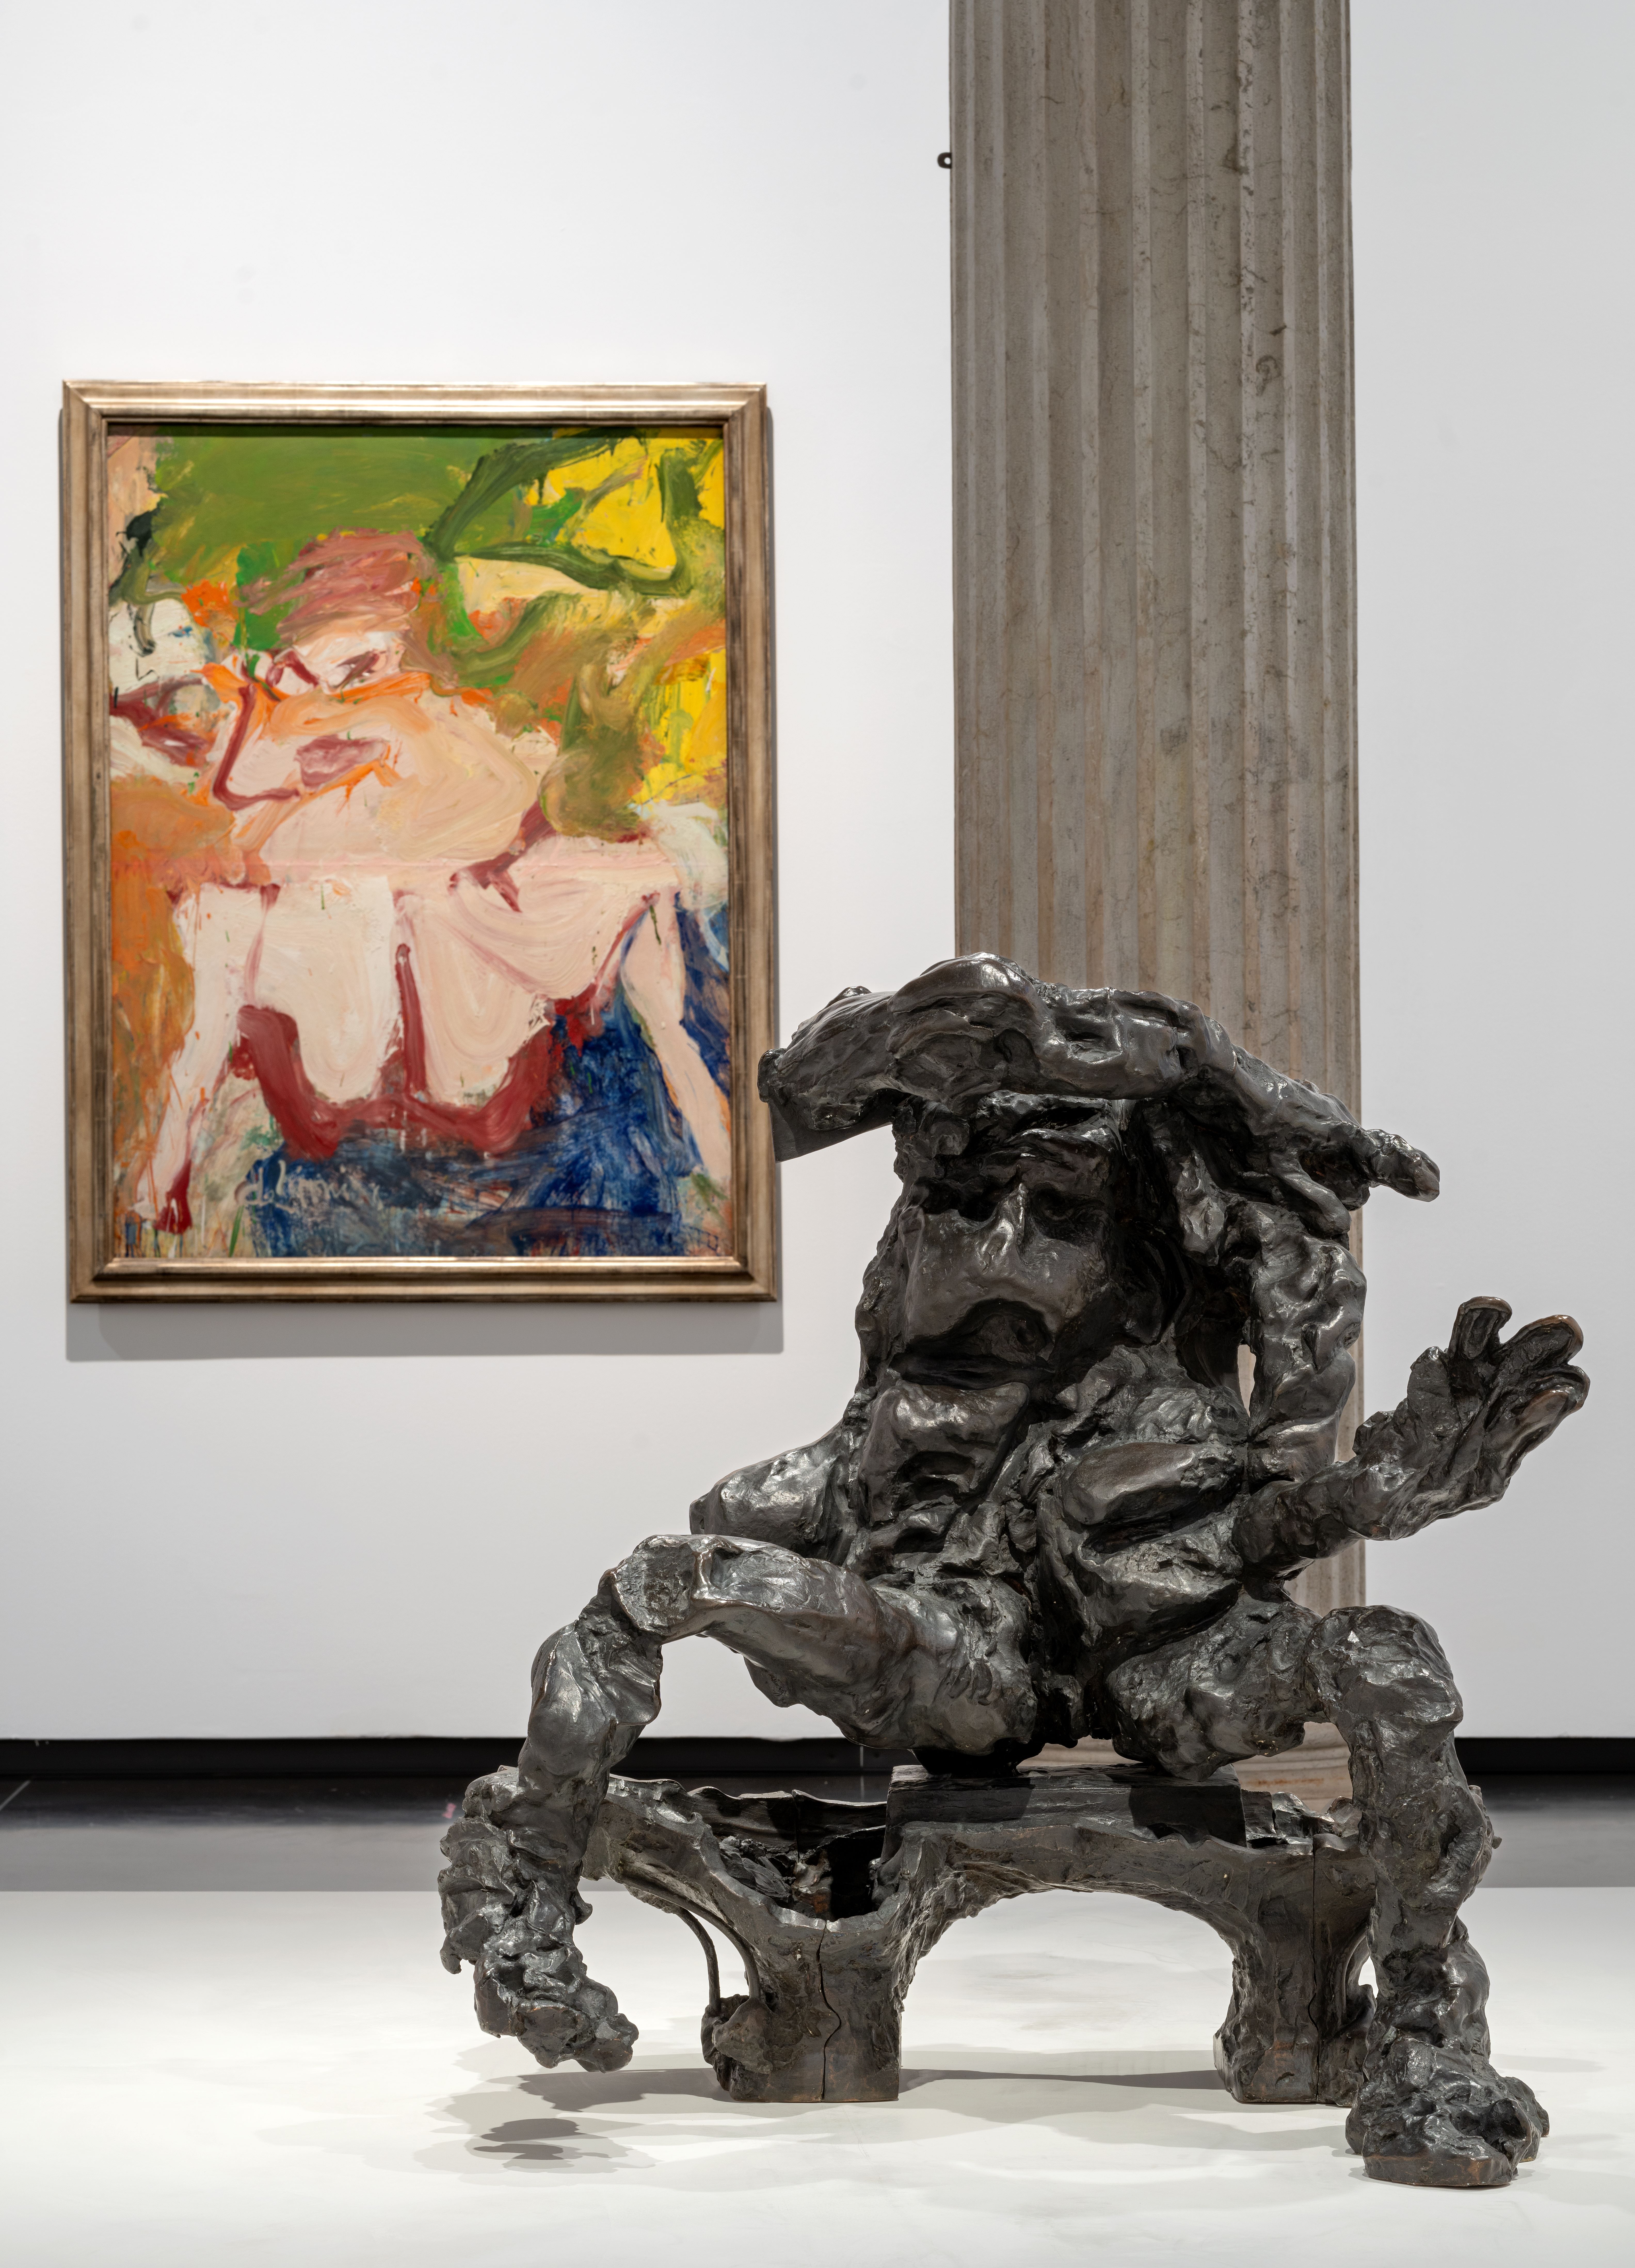 Installation View of Willem de Kooning and Italy, Gallerie dell'Accademia, Venice, 2024 / © 2024 The Willem de Kooning Foundation, SIAE. Photograph by Matteo de Fina, 2024 